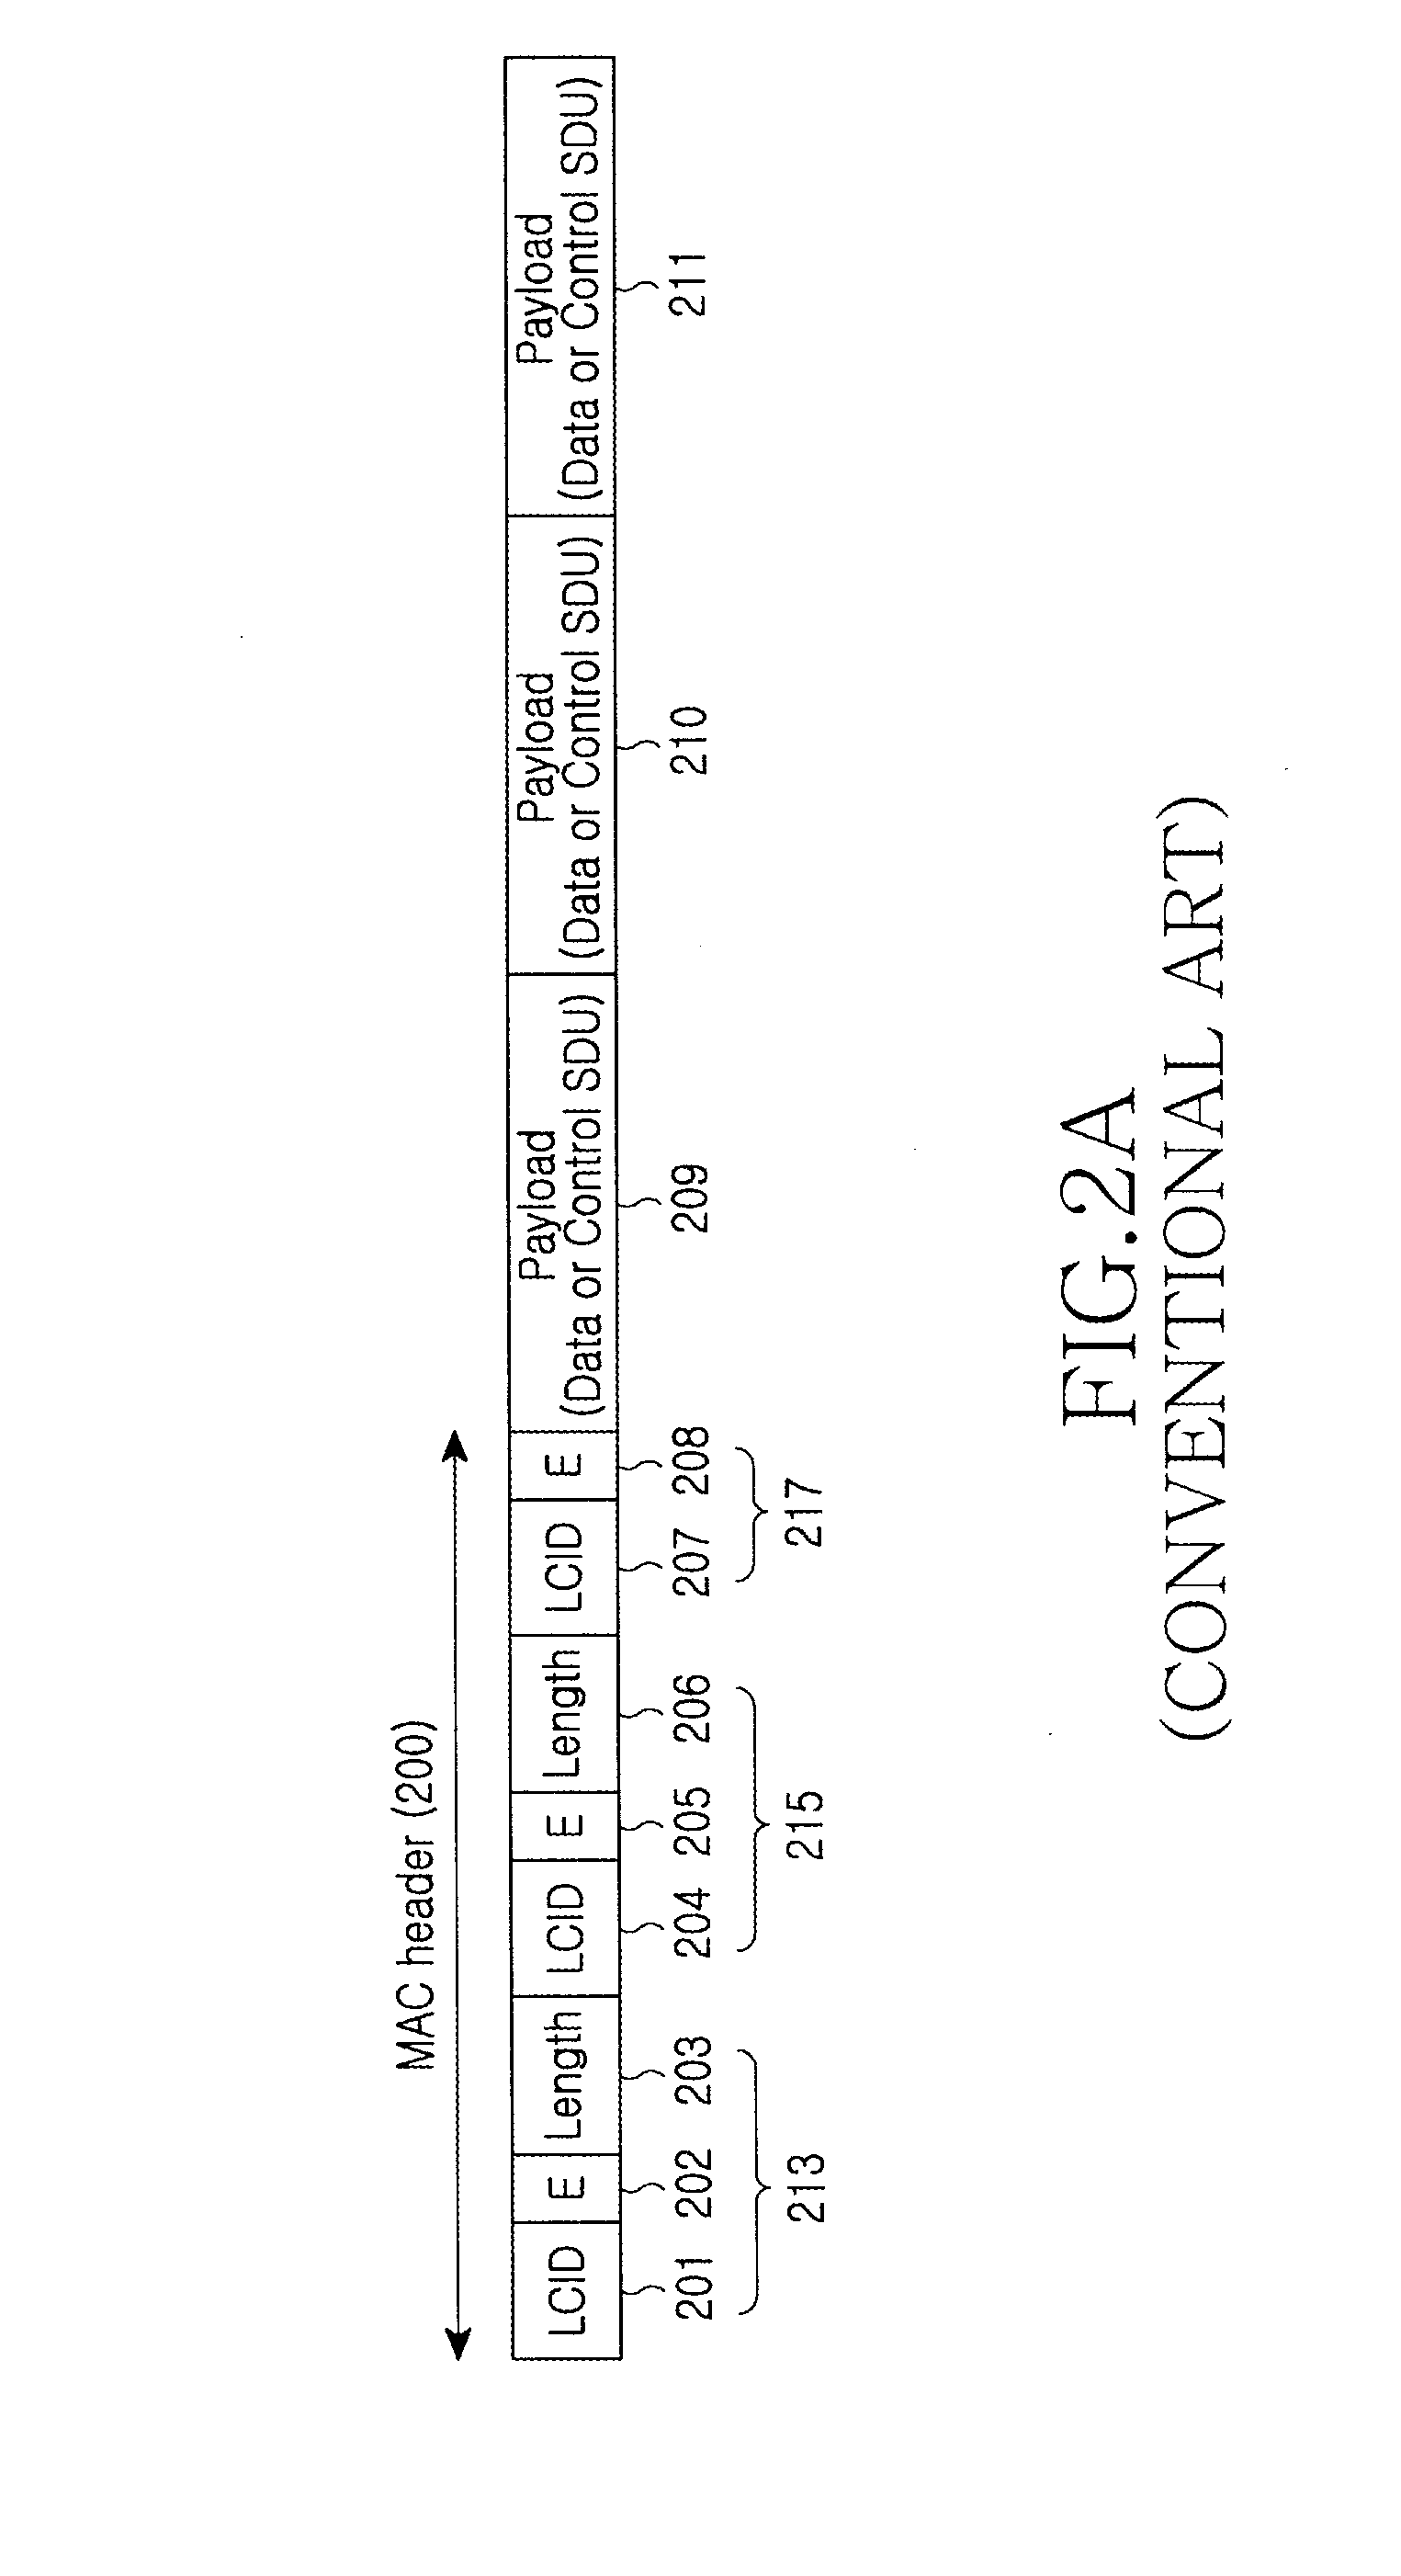 Apparatus and method for generating and parsing mac pdu in a mobile communication system